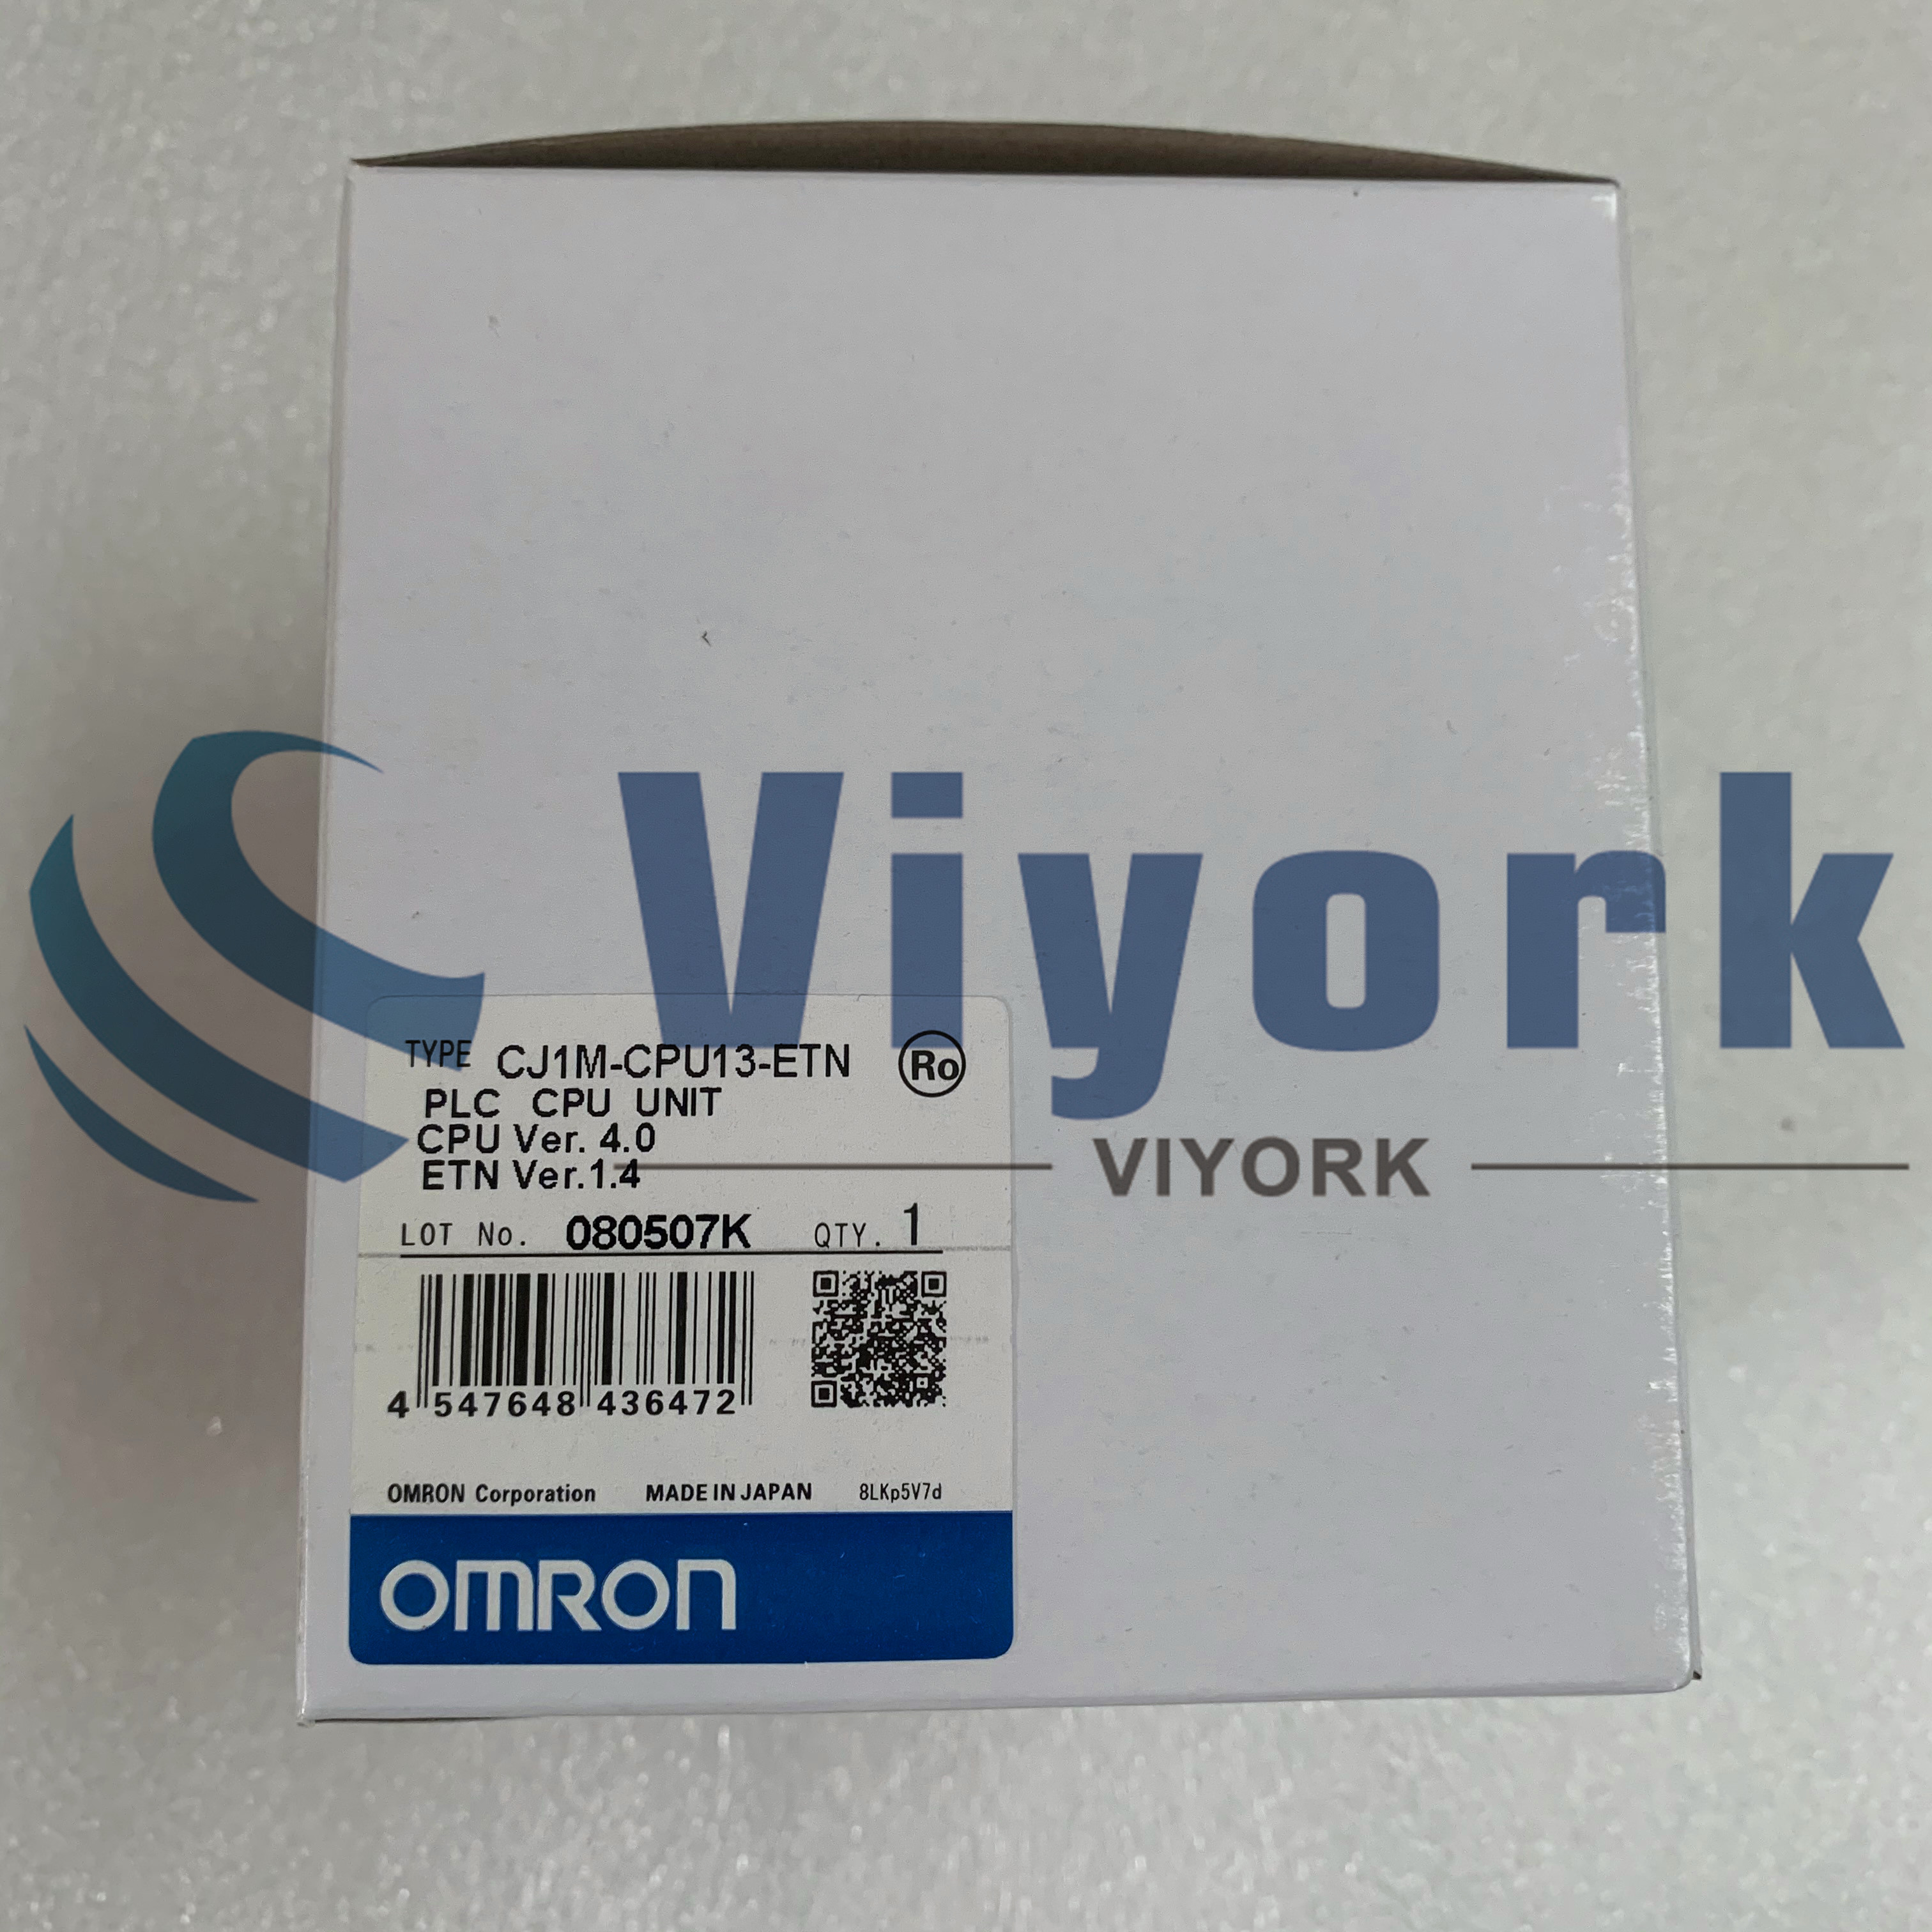 Omron CJ1M-CPU13-ETN CPU WITH BUILT-IN ETHERNET 150 POINTS I/O CAPACITY NEW